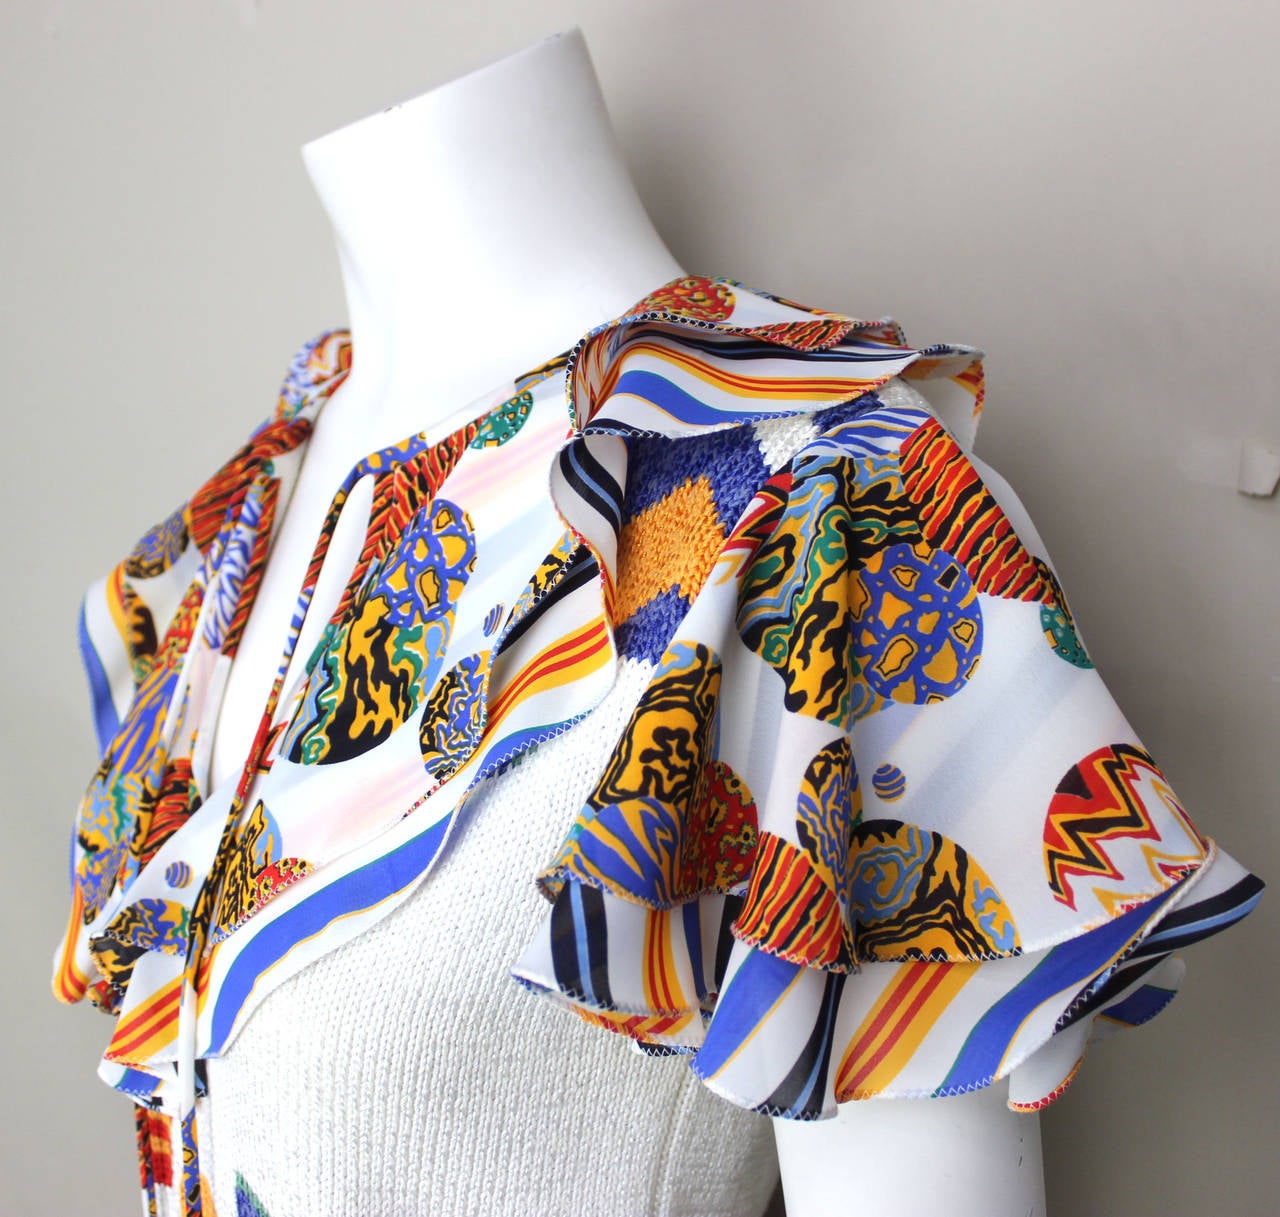 The design of this top is very unique with its combination of a cotton knit body and rayon collar and sleeves. The pattern combines stripes, abstract designs, and geometrics. It closes with two ties trimmed with tassels. Very chic!

Approximate